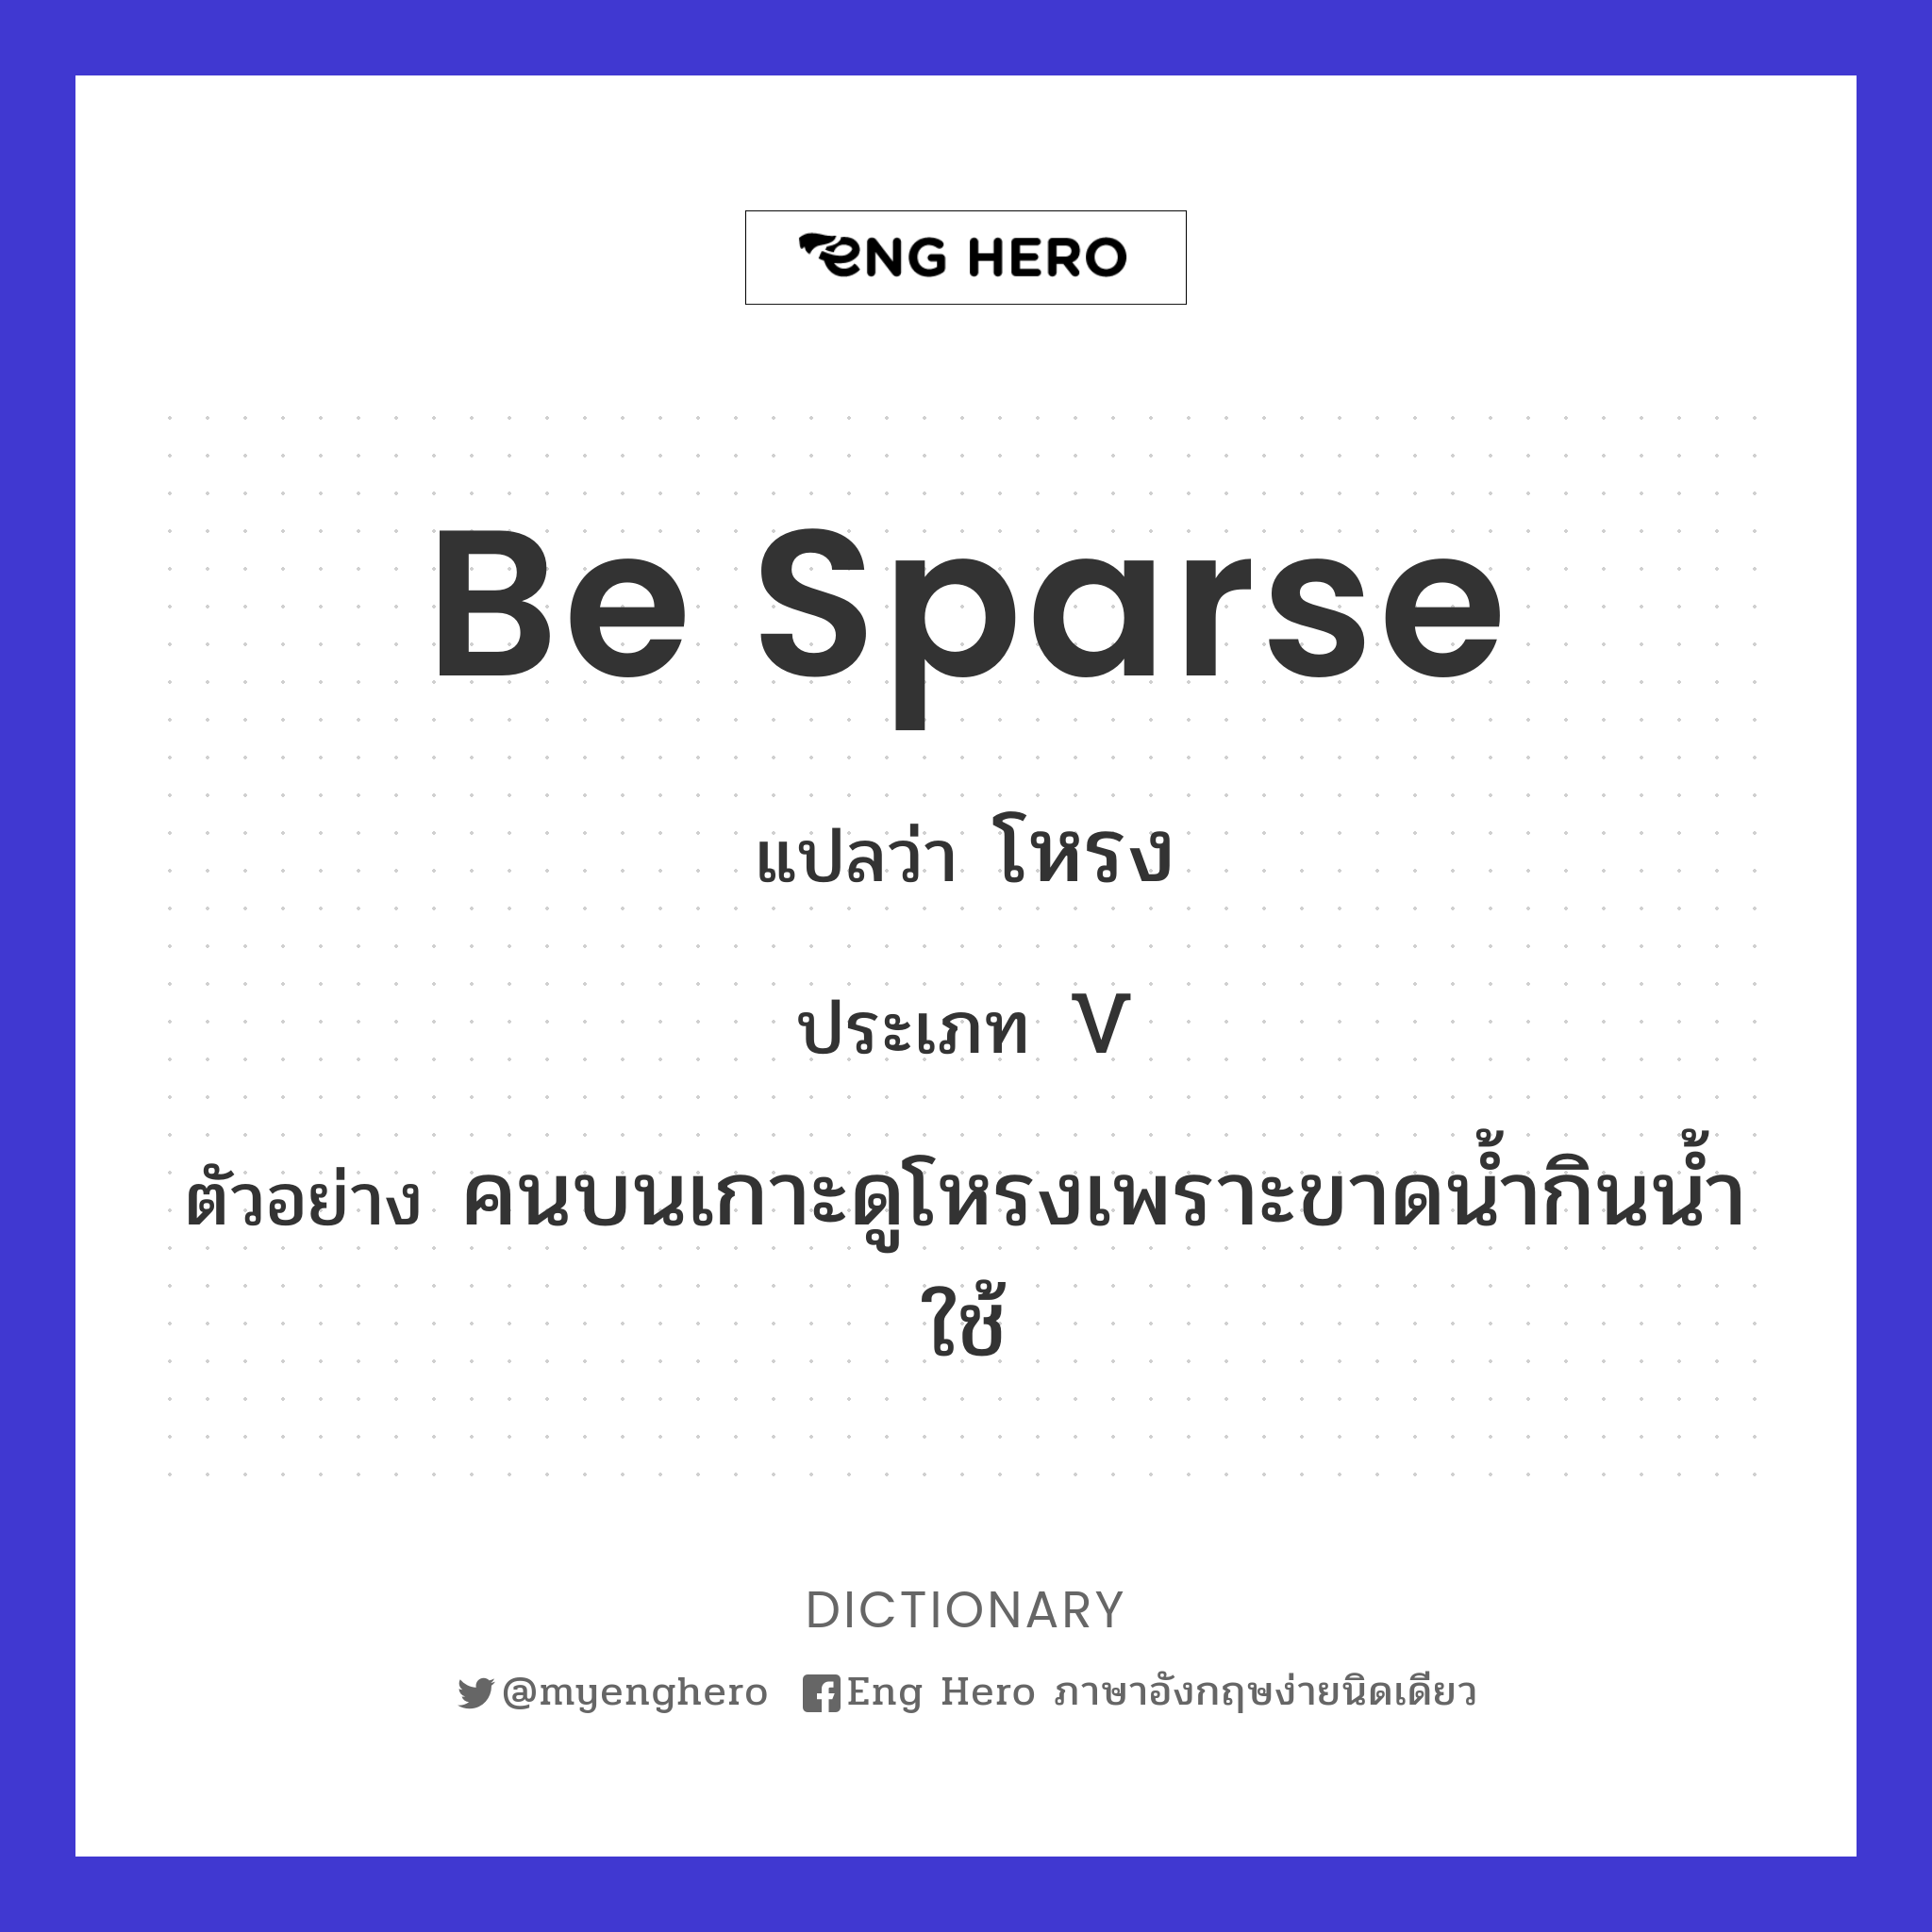 be sparse